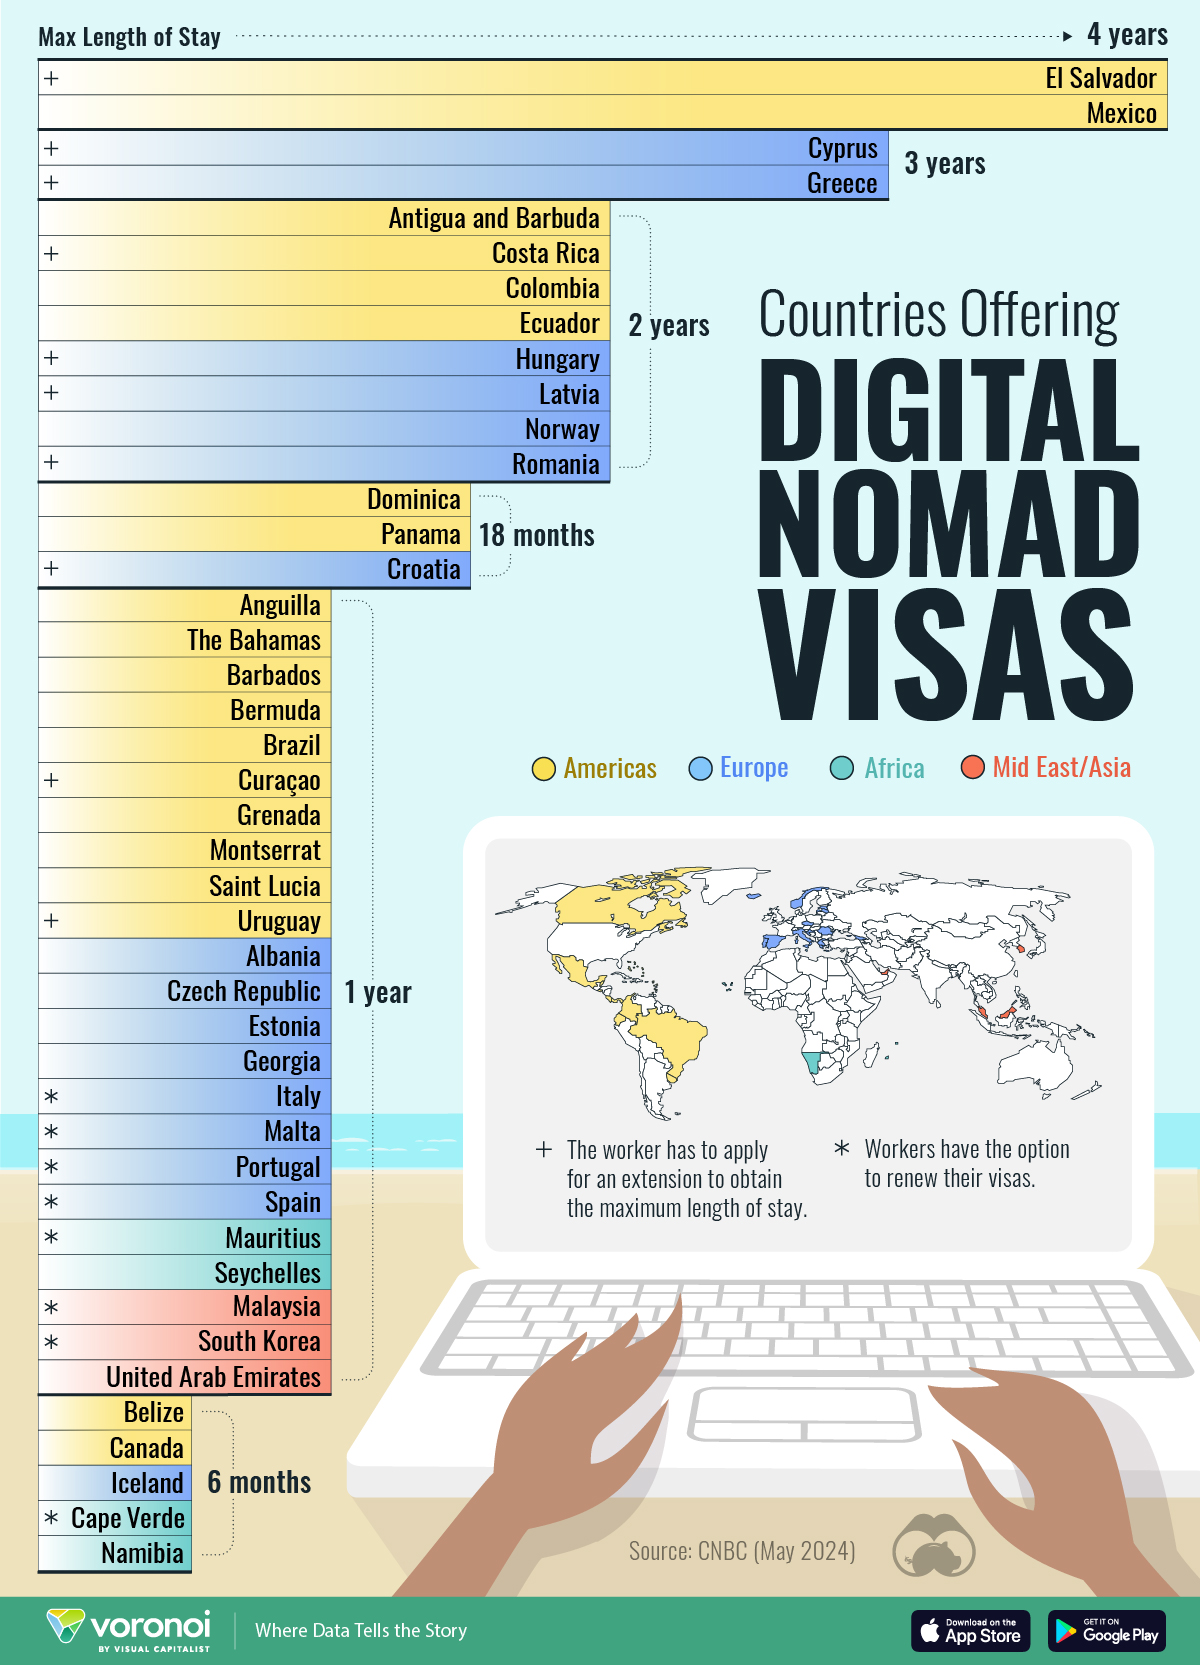 This bar chart shows all the countries that offer digital nomad visas as of May 2024.